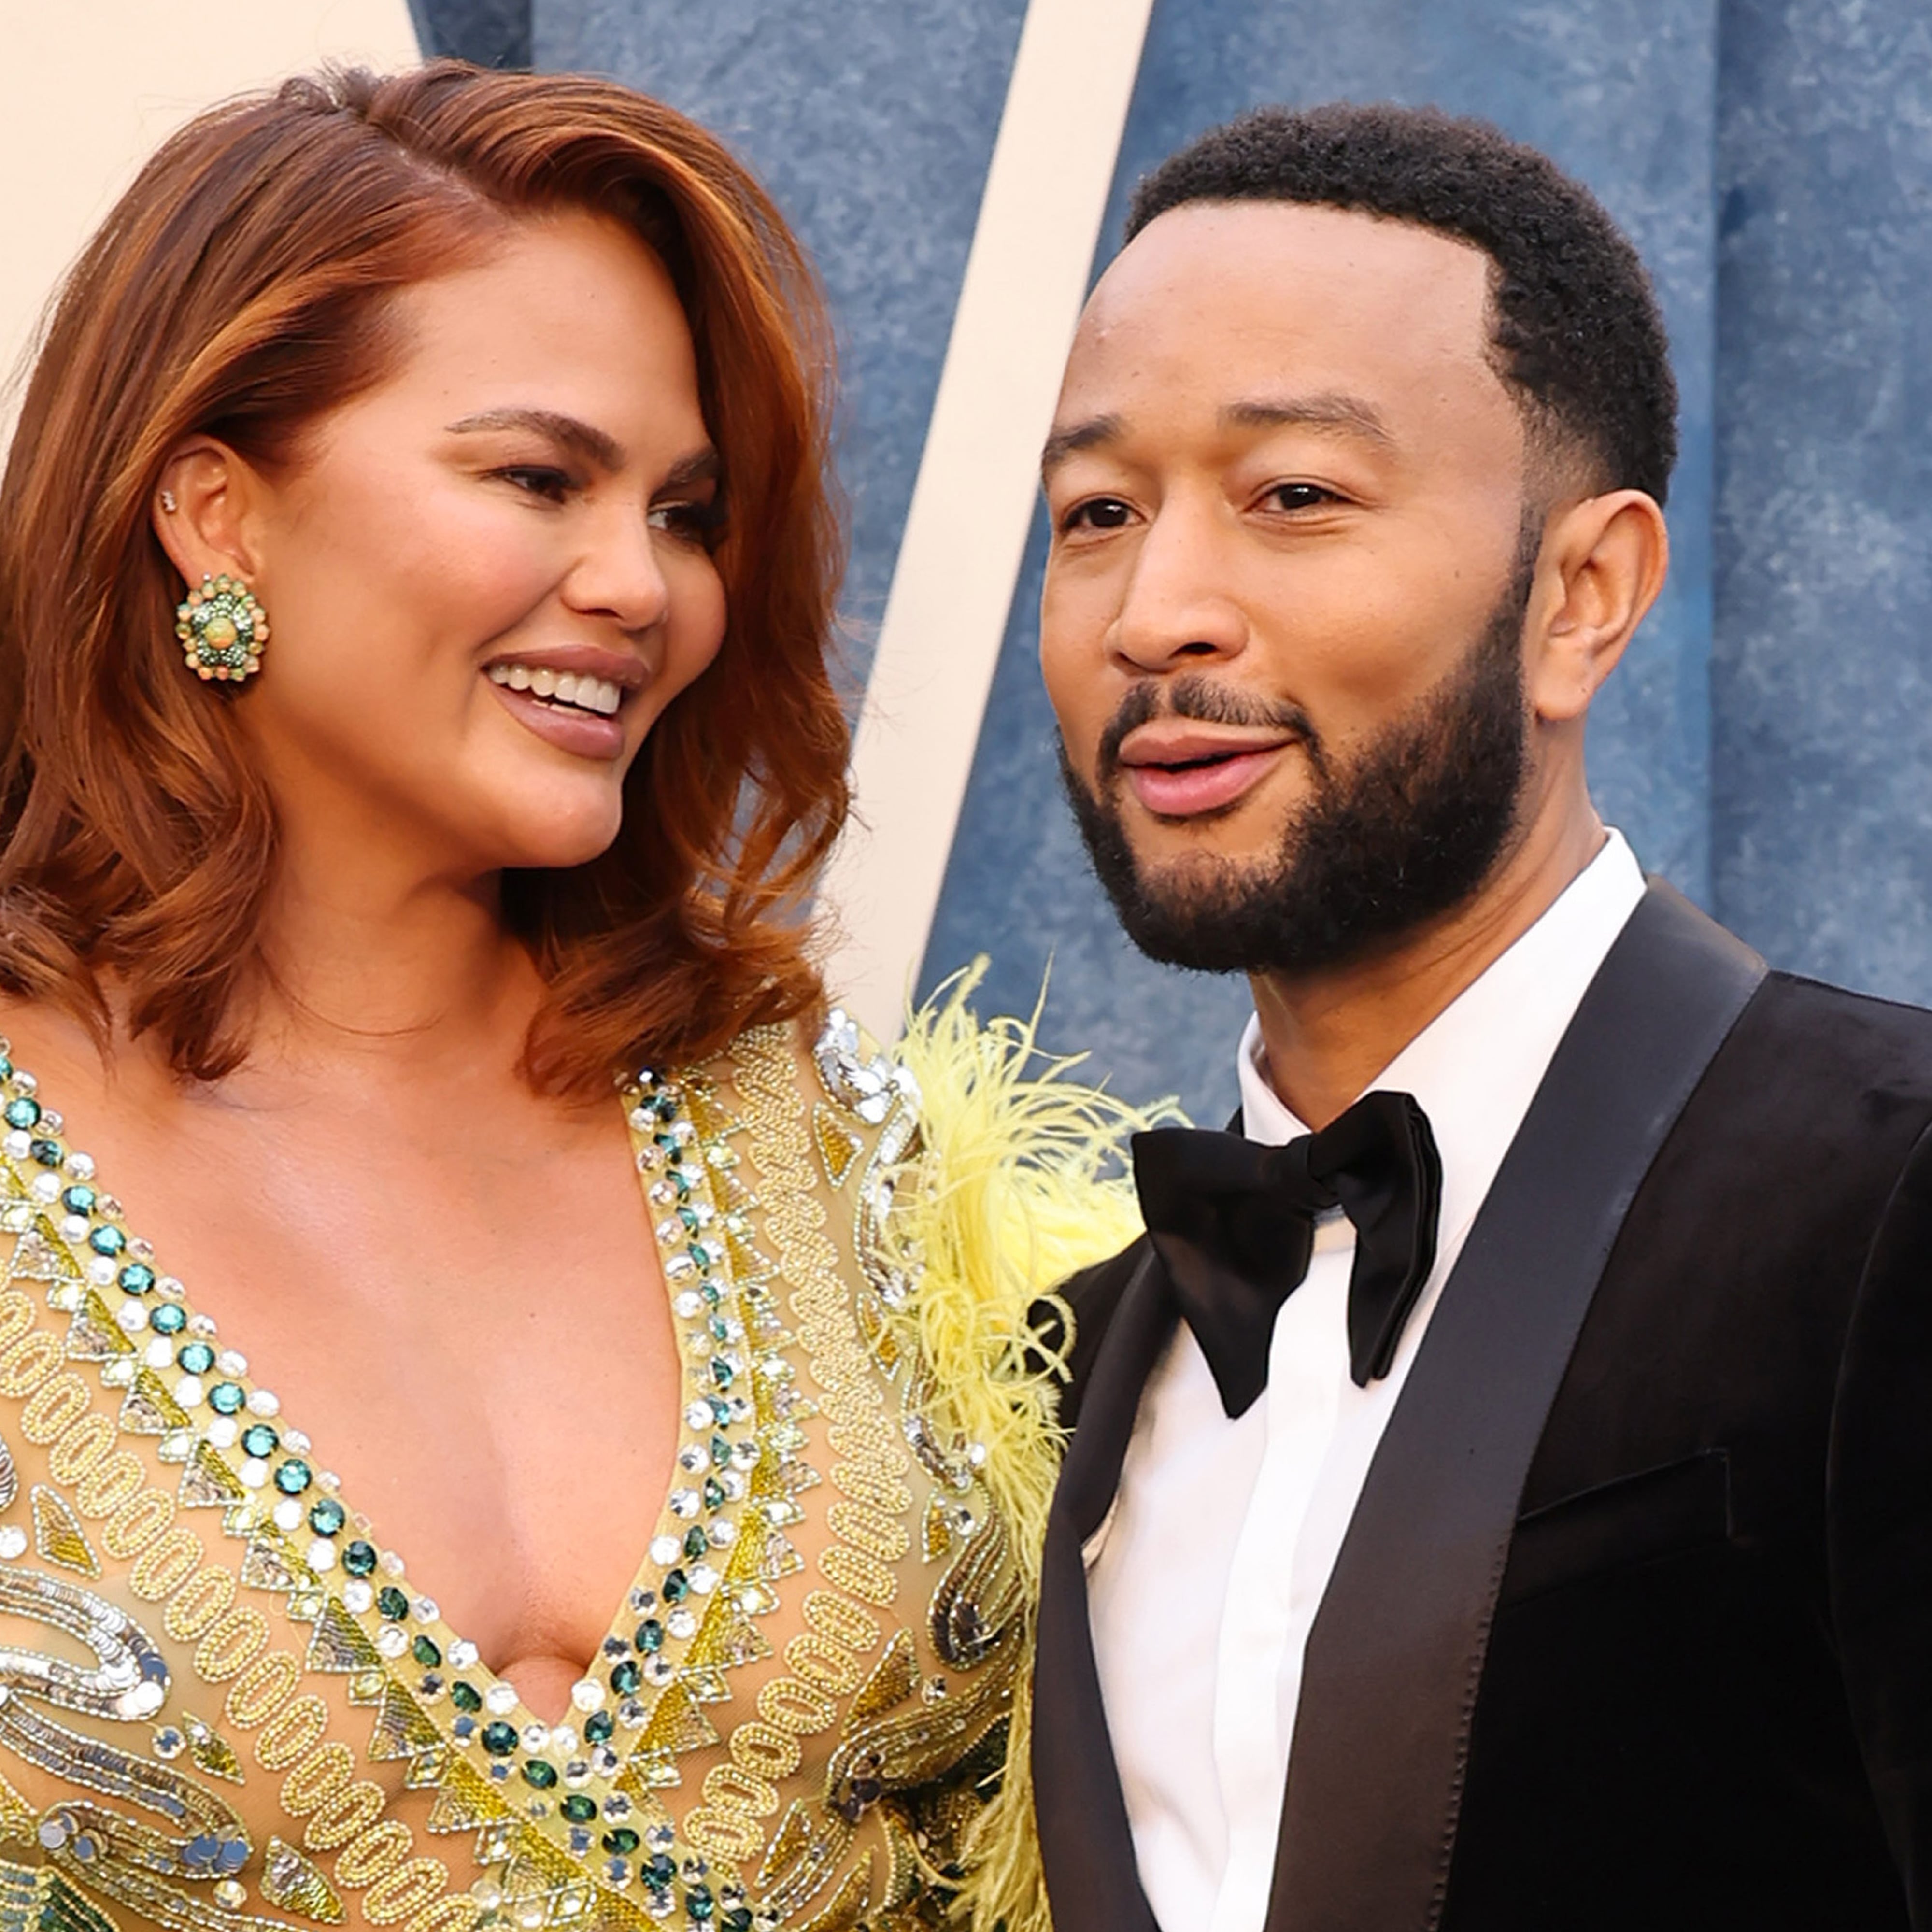 Surprise! Chrissy Teigen and John Legend Just Revealed They’ve Welcomed Another Baby